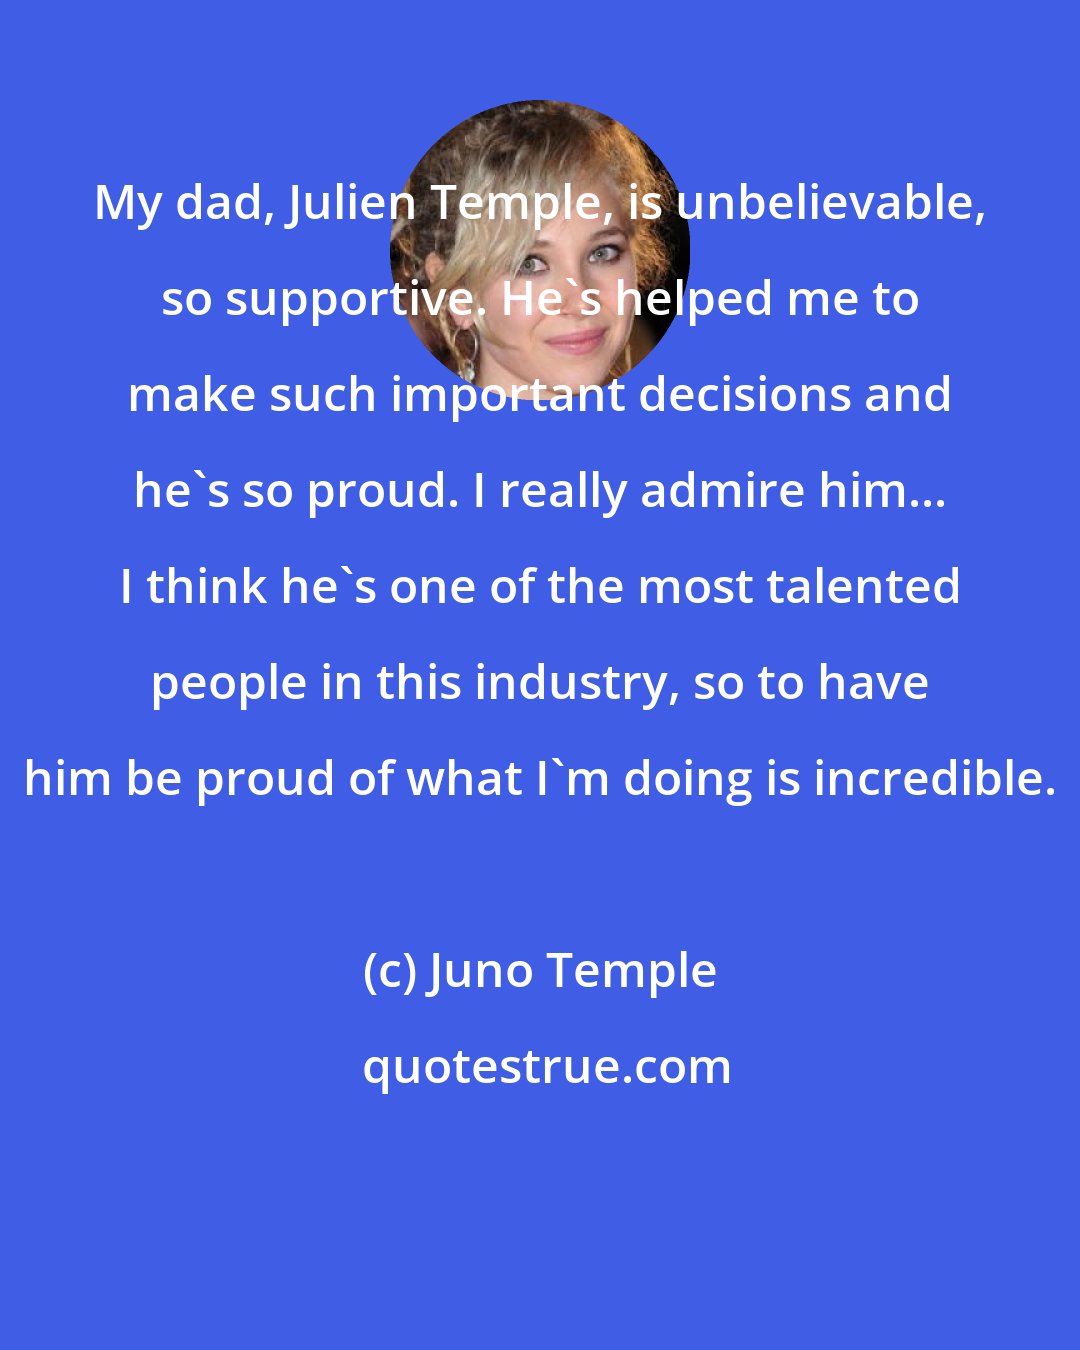 Juno Temple: My dad, Julien Temple, is unbelievable, so supportive. He's helped me to make such important decisions and he's so proud. I really admire him... I think he's one of the most talented people in this industry, so to have him be proud of what I'm doing is incredible.